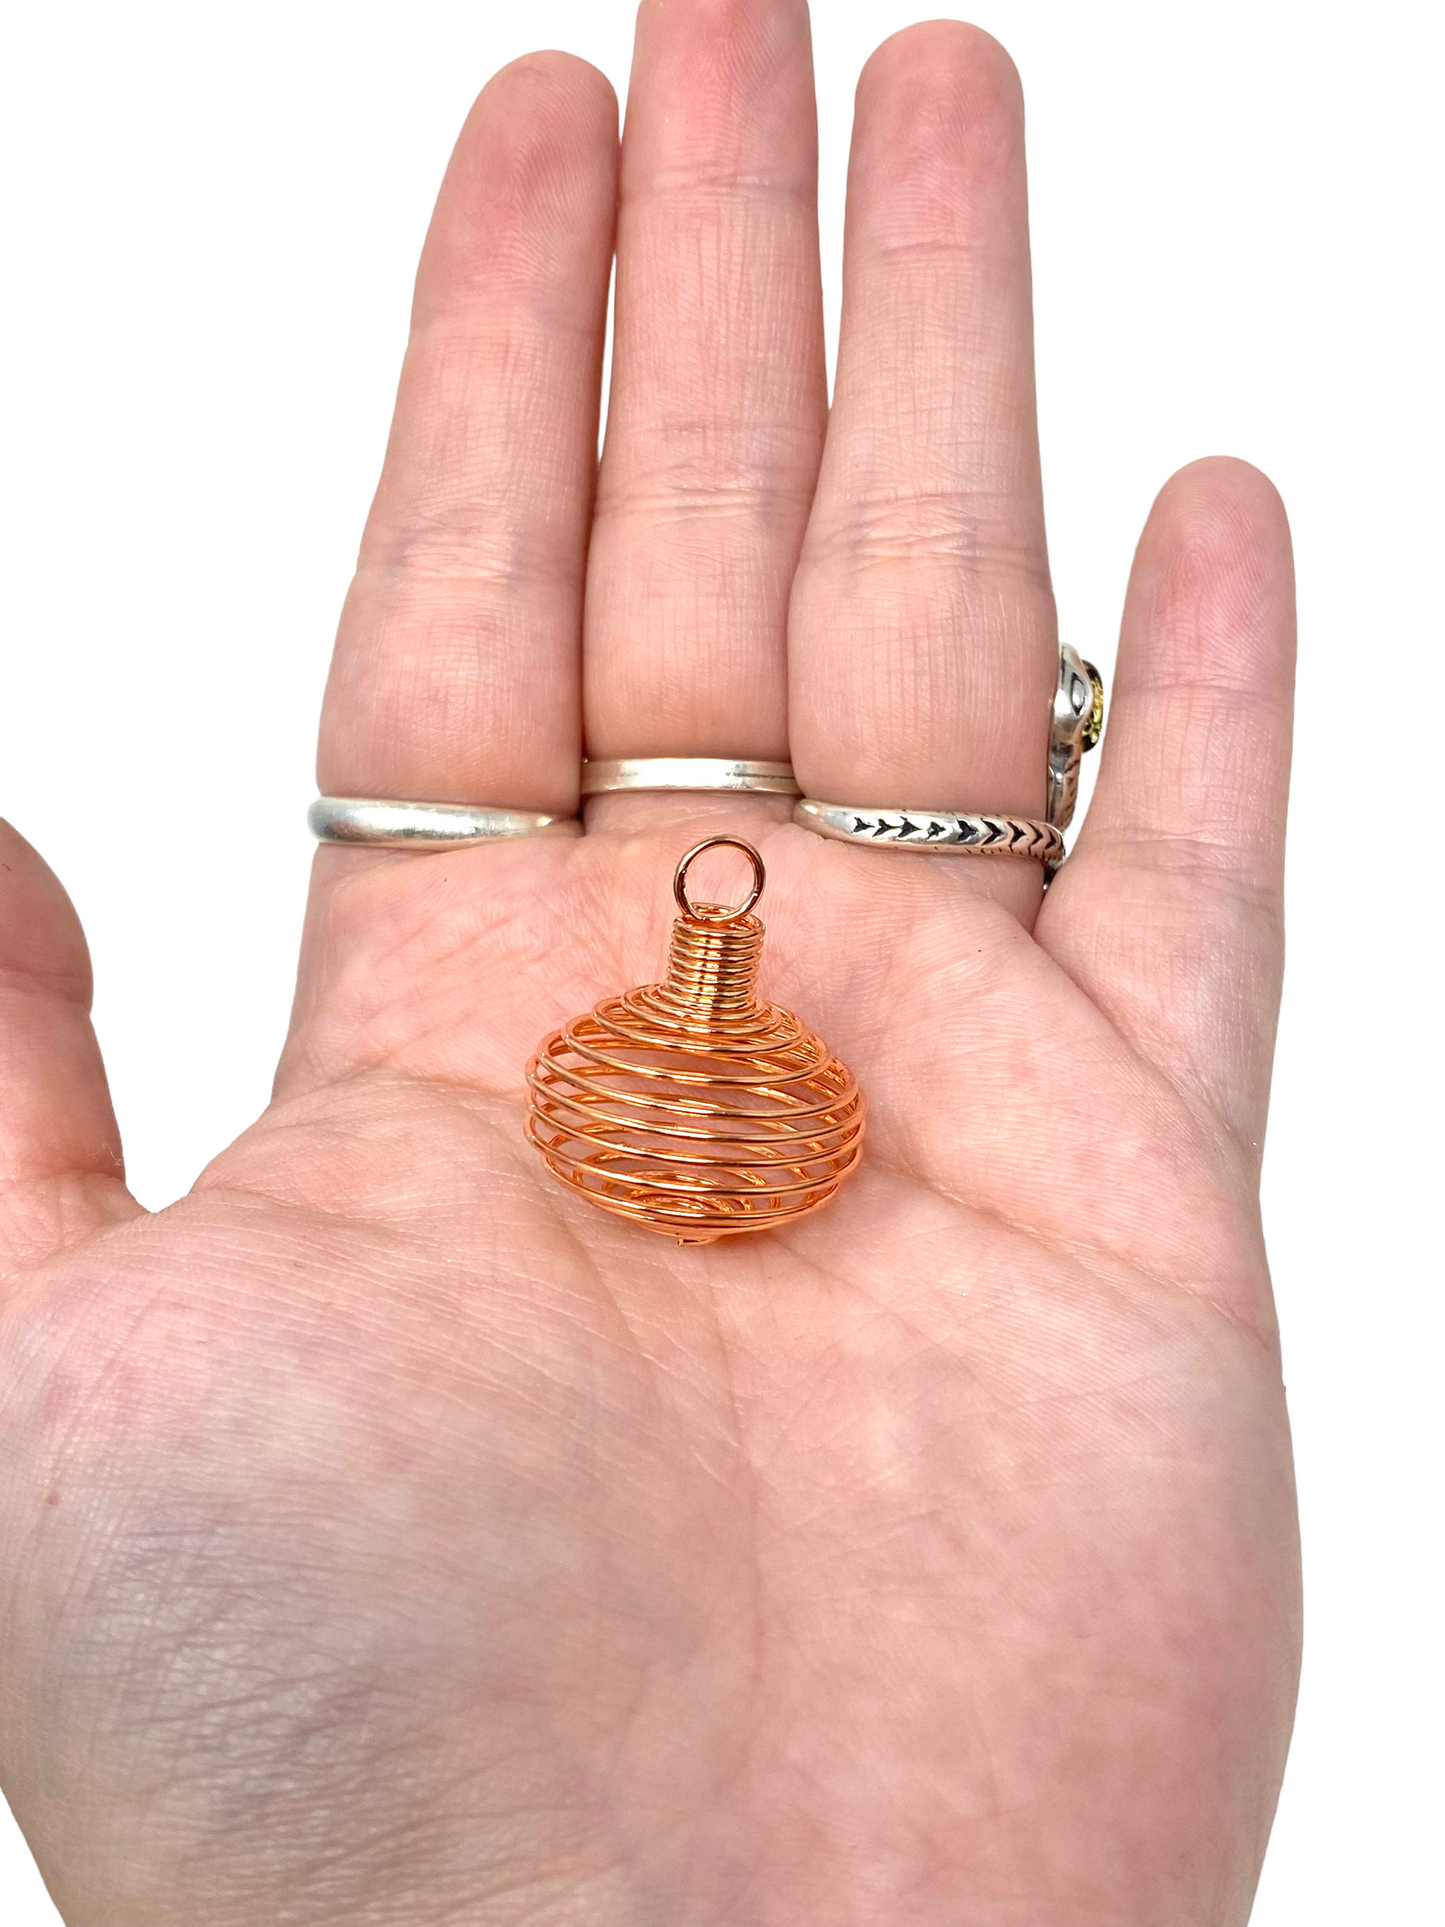 1 1/2” Empty Spring Cage Pendant in Gold, Silver and Copper